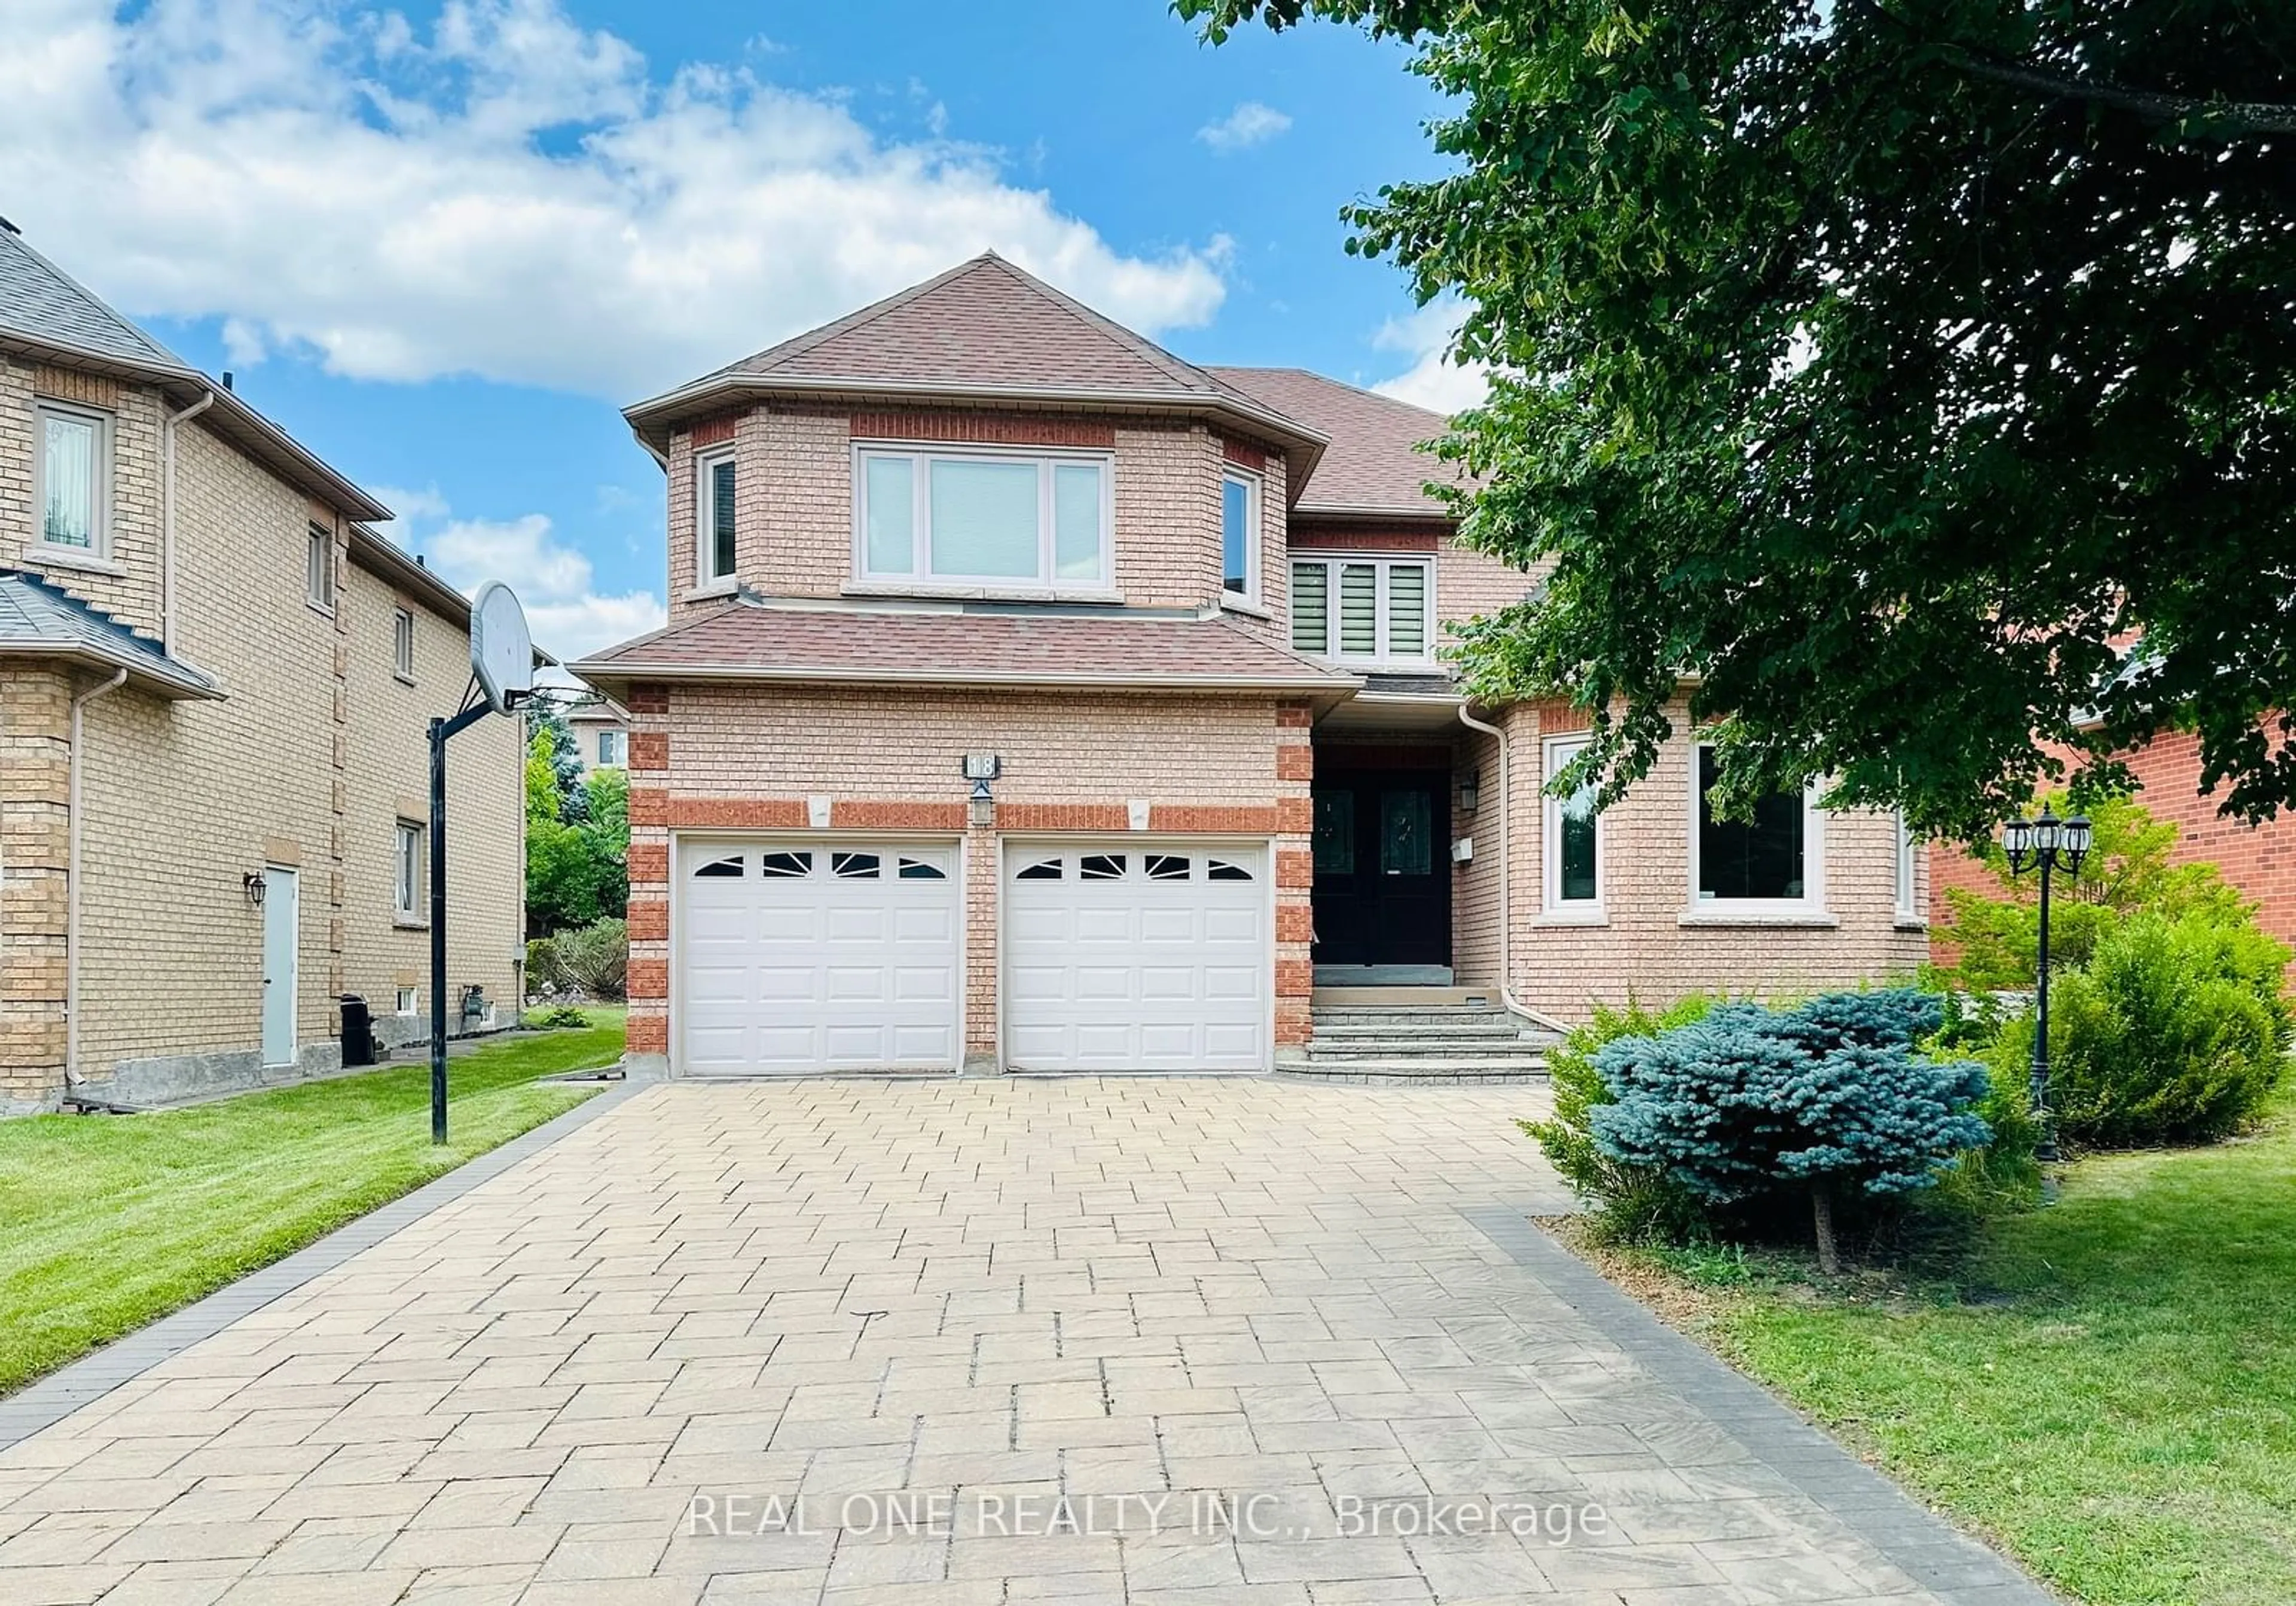 Home with brick exterior material for 18 Henricks Cres, Richmond Hill Ontario L4B 3W4